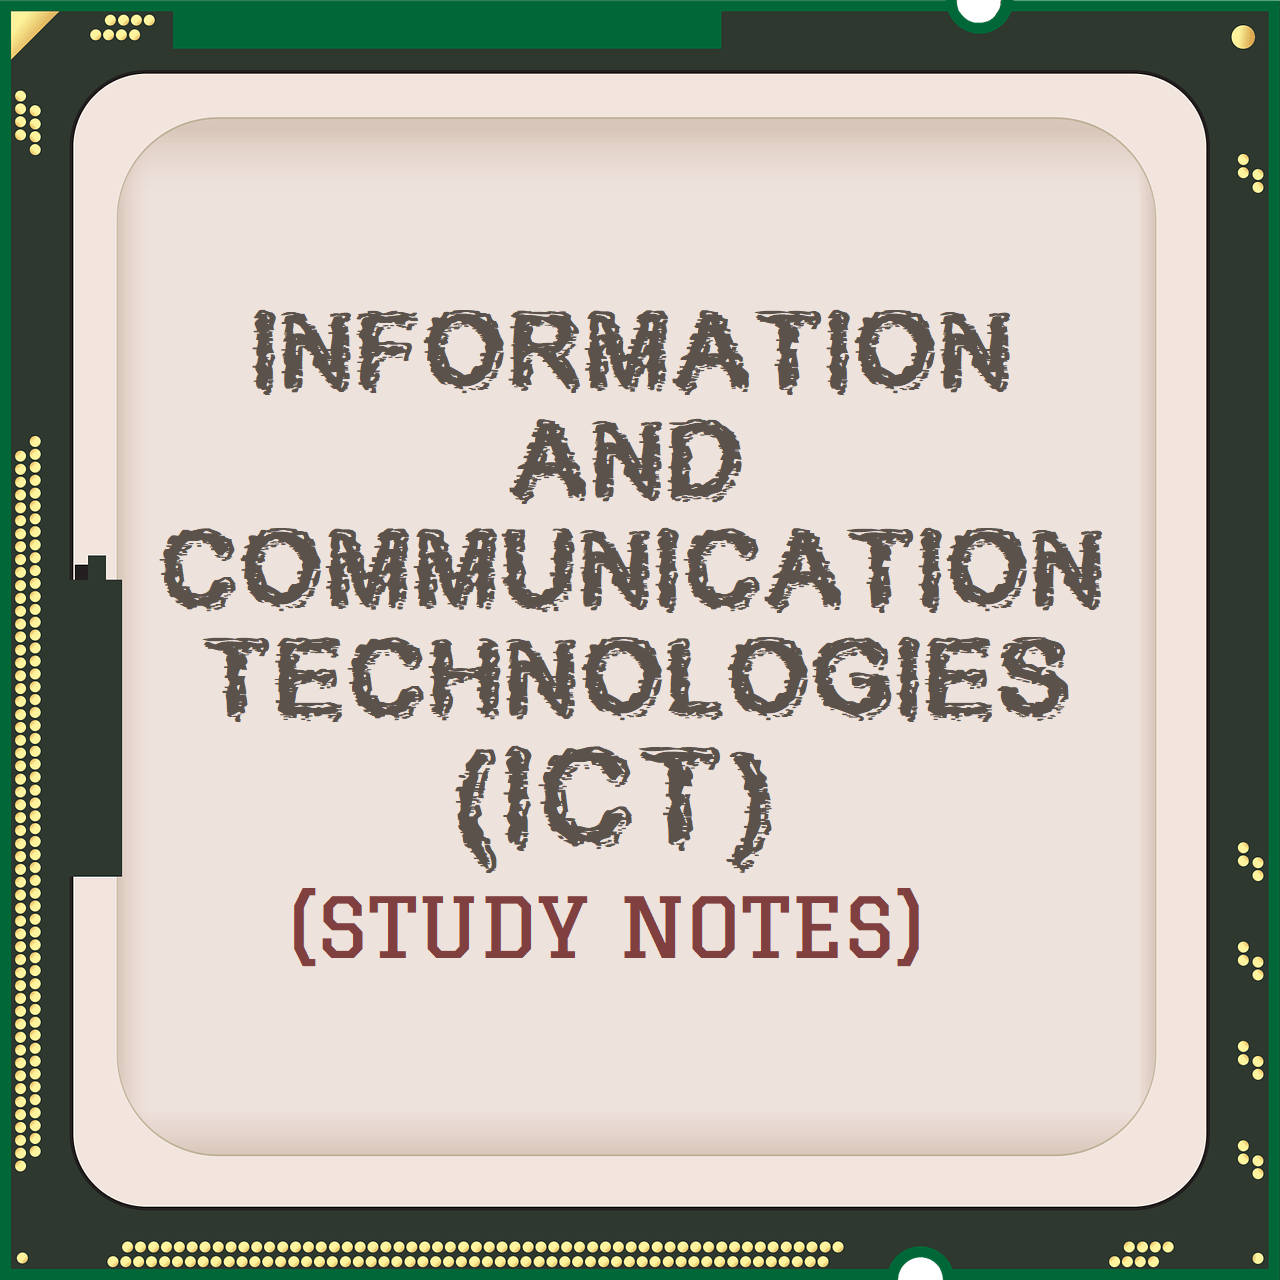 Information and communication technology ICT notes